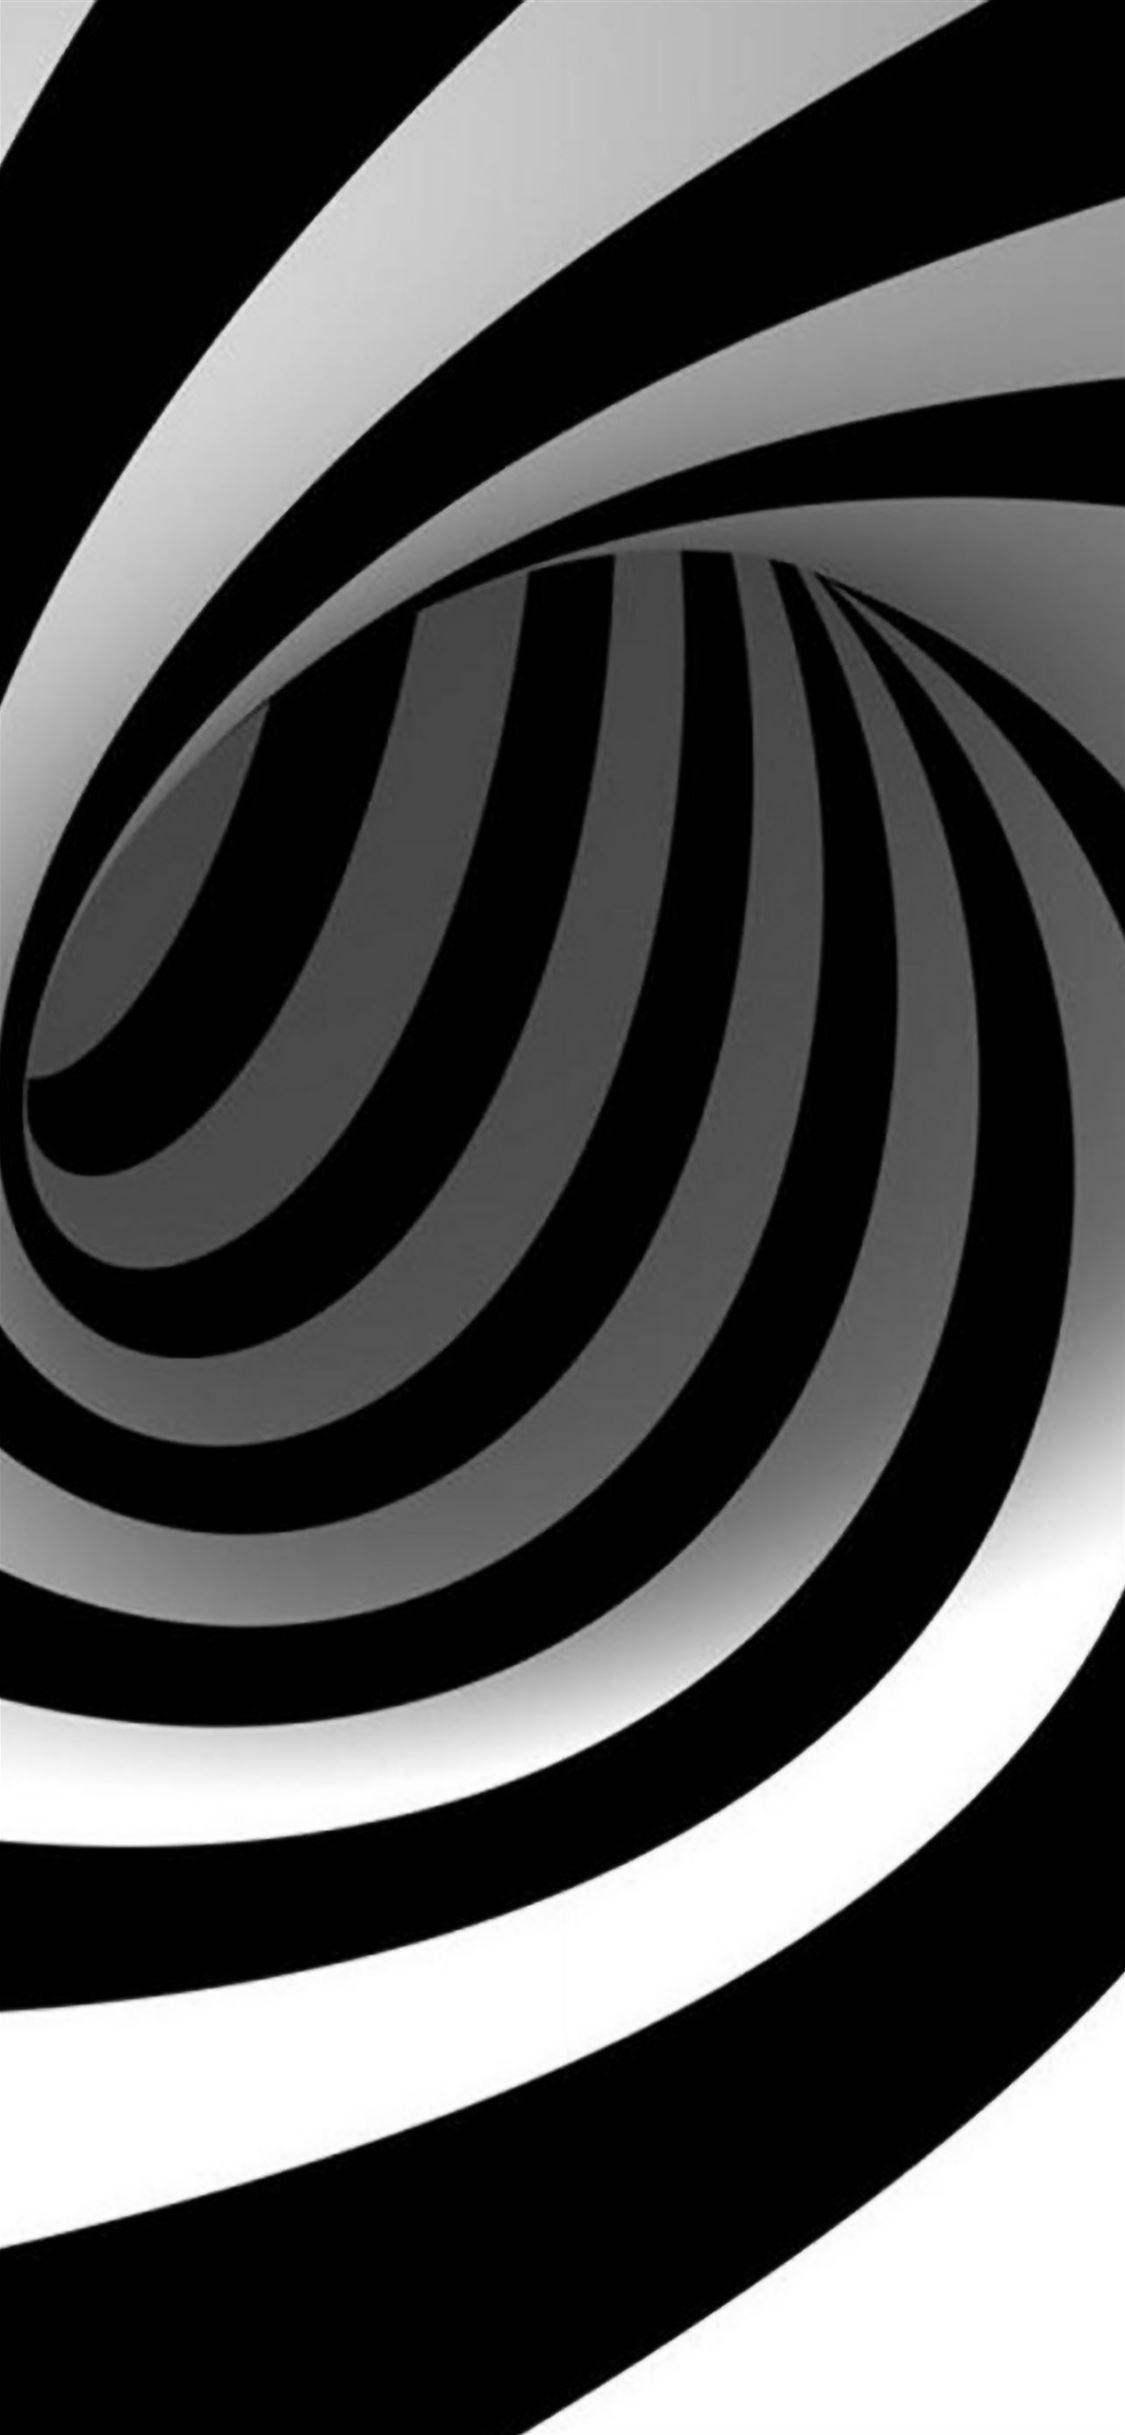 3D Abstract Swirl iPhone Wallpapers Free Download